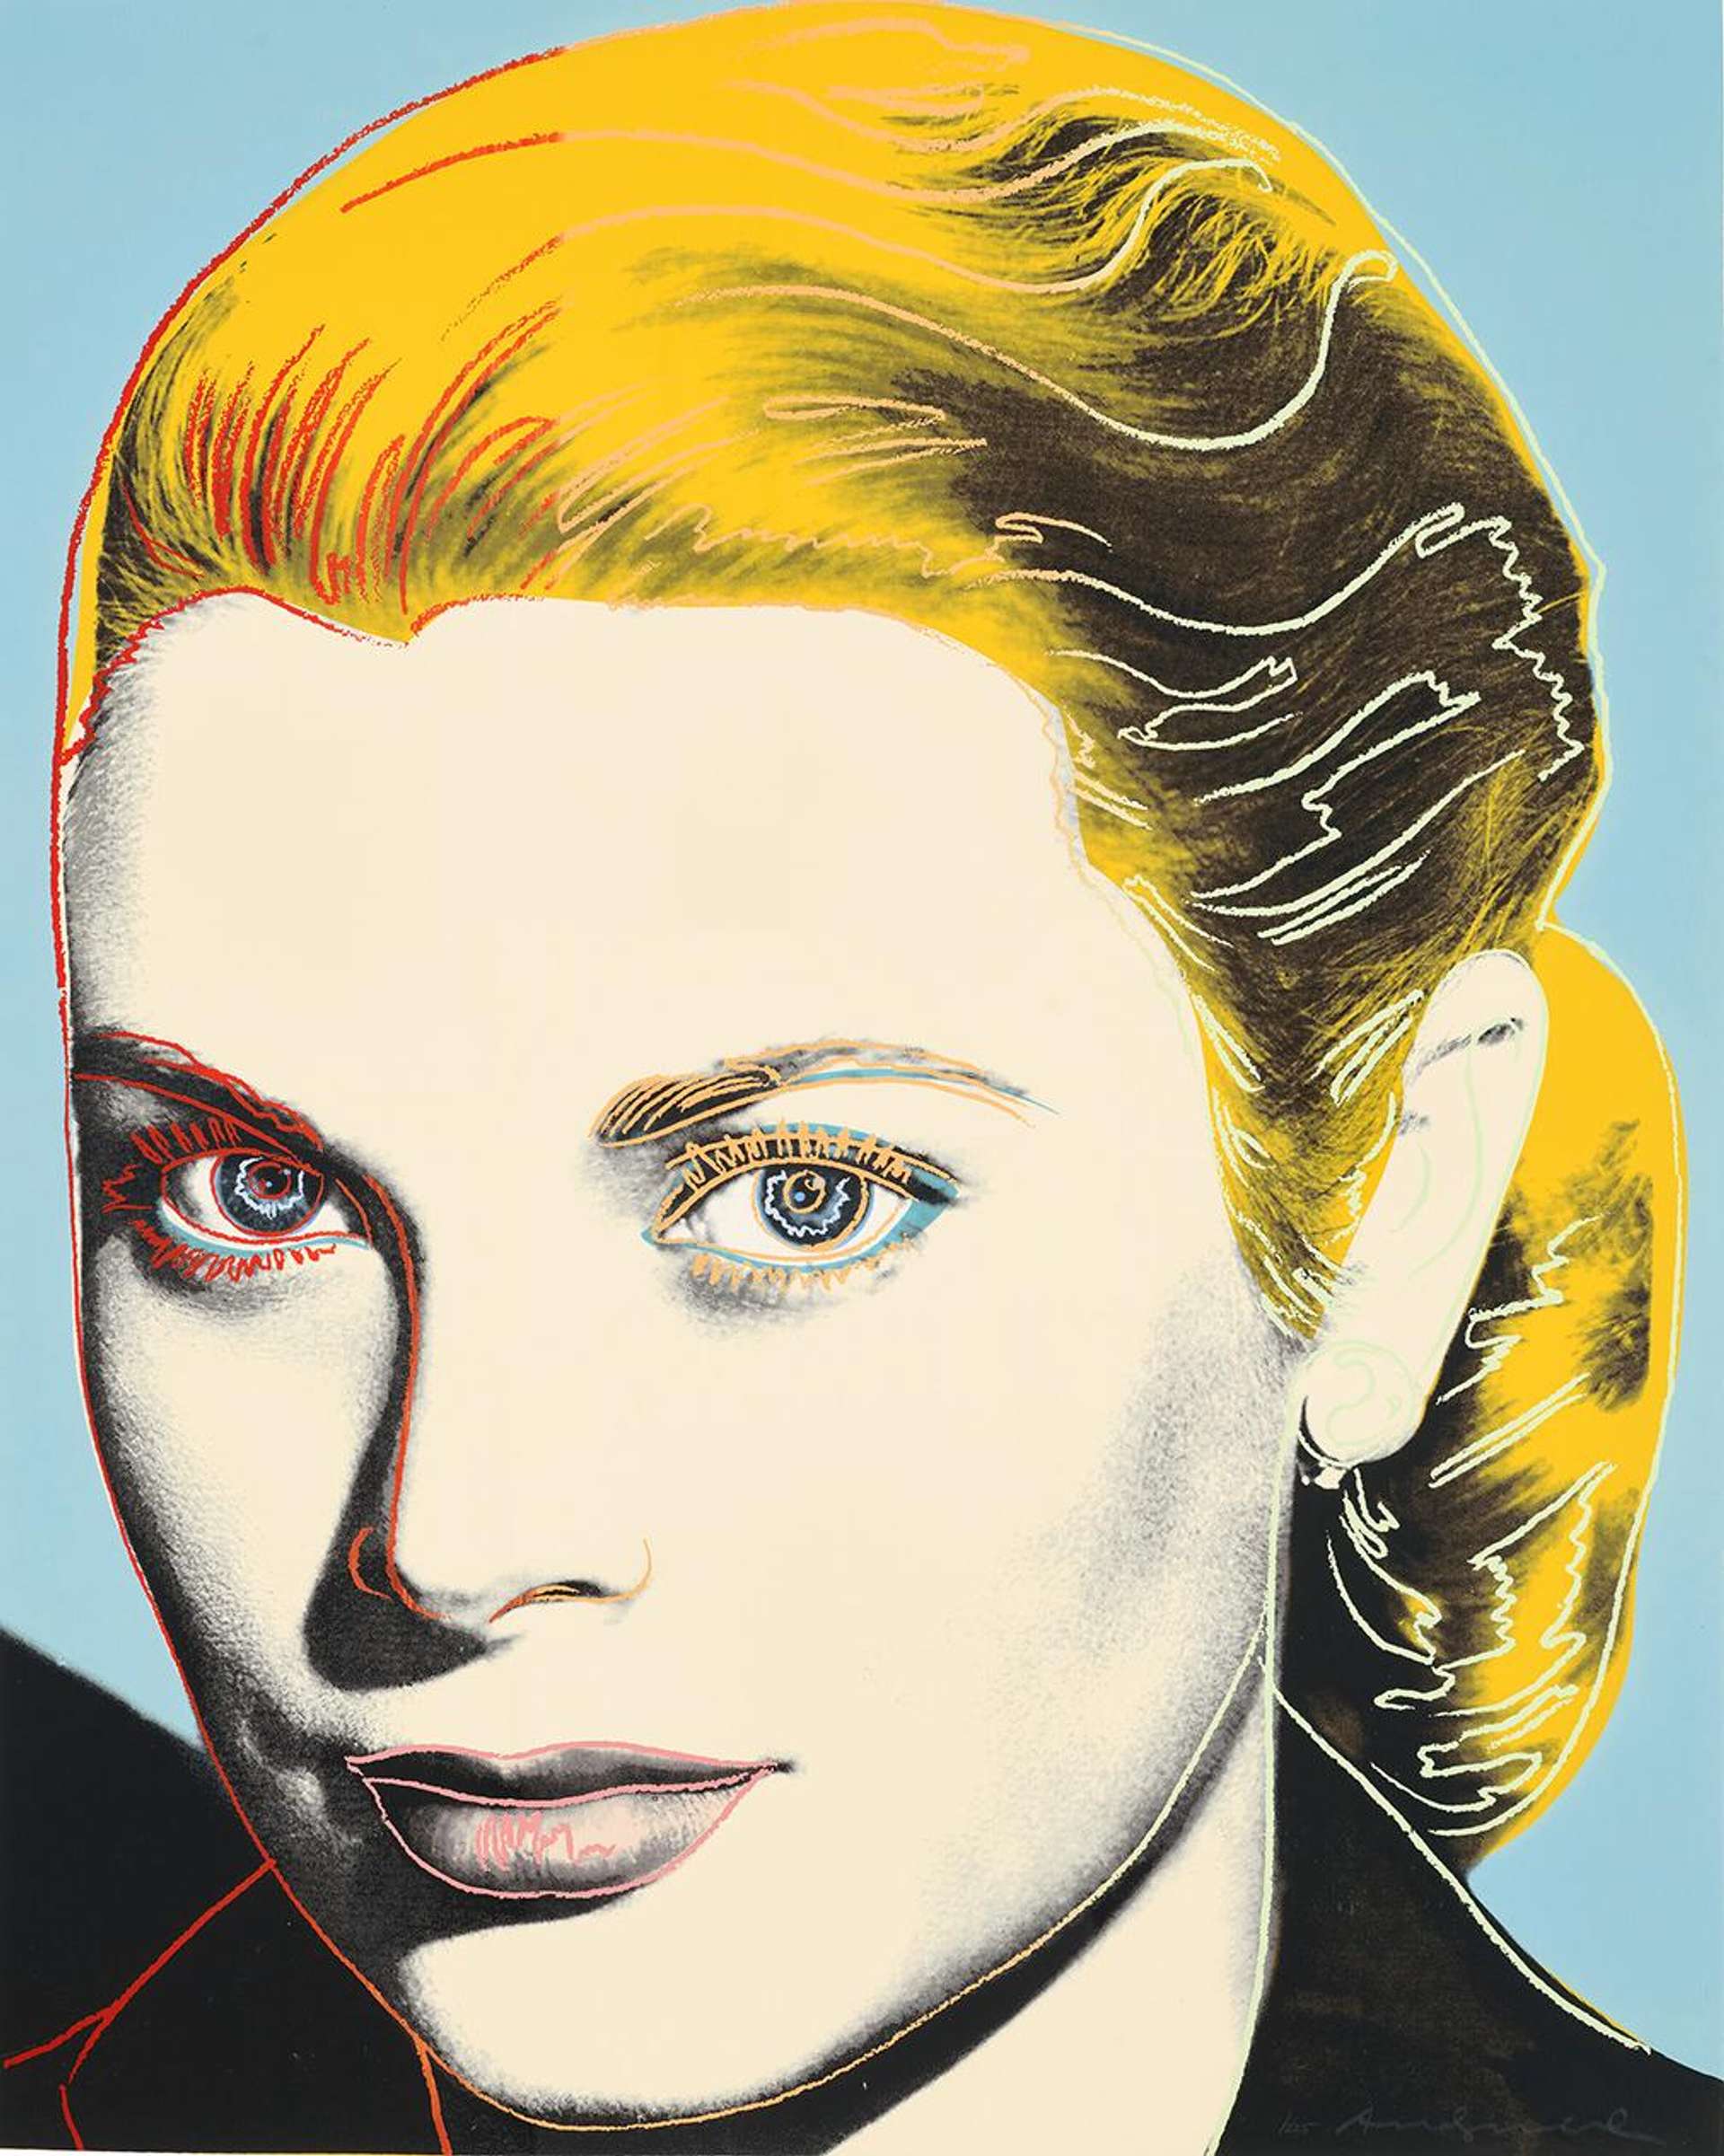 A screenprint by Andy Warhol depicting Grace Kelly with bright yellow blonde hair against a light sky blue background